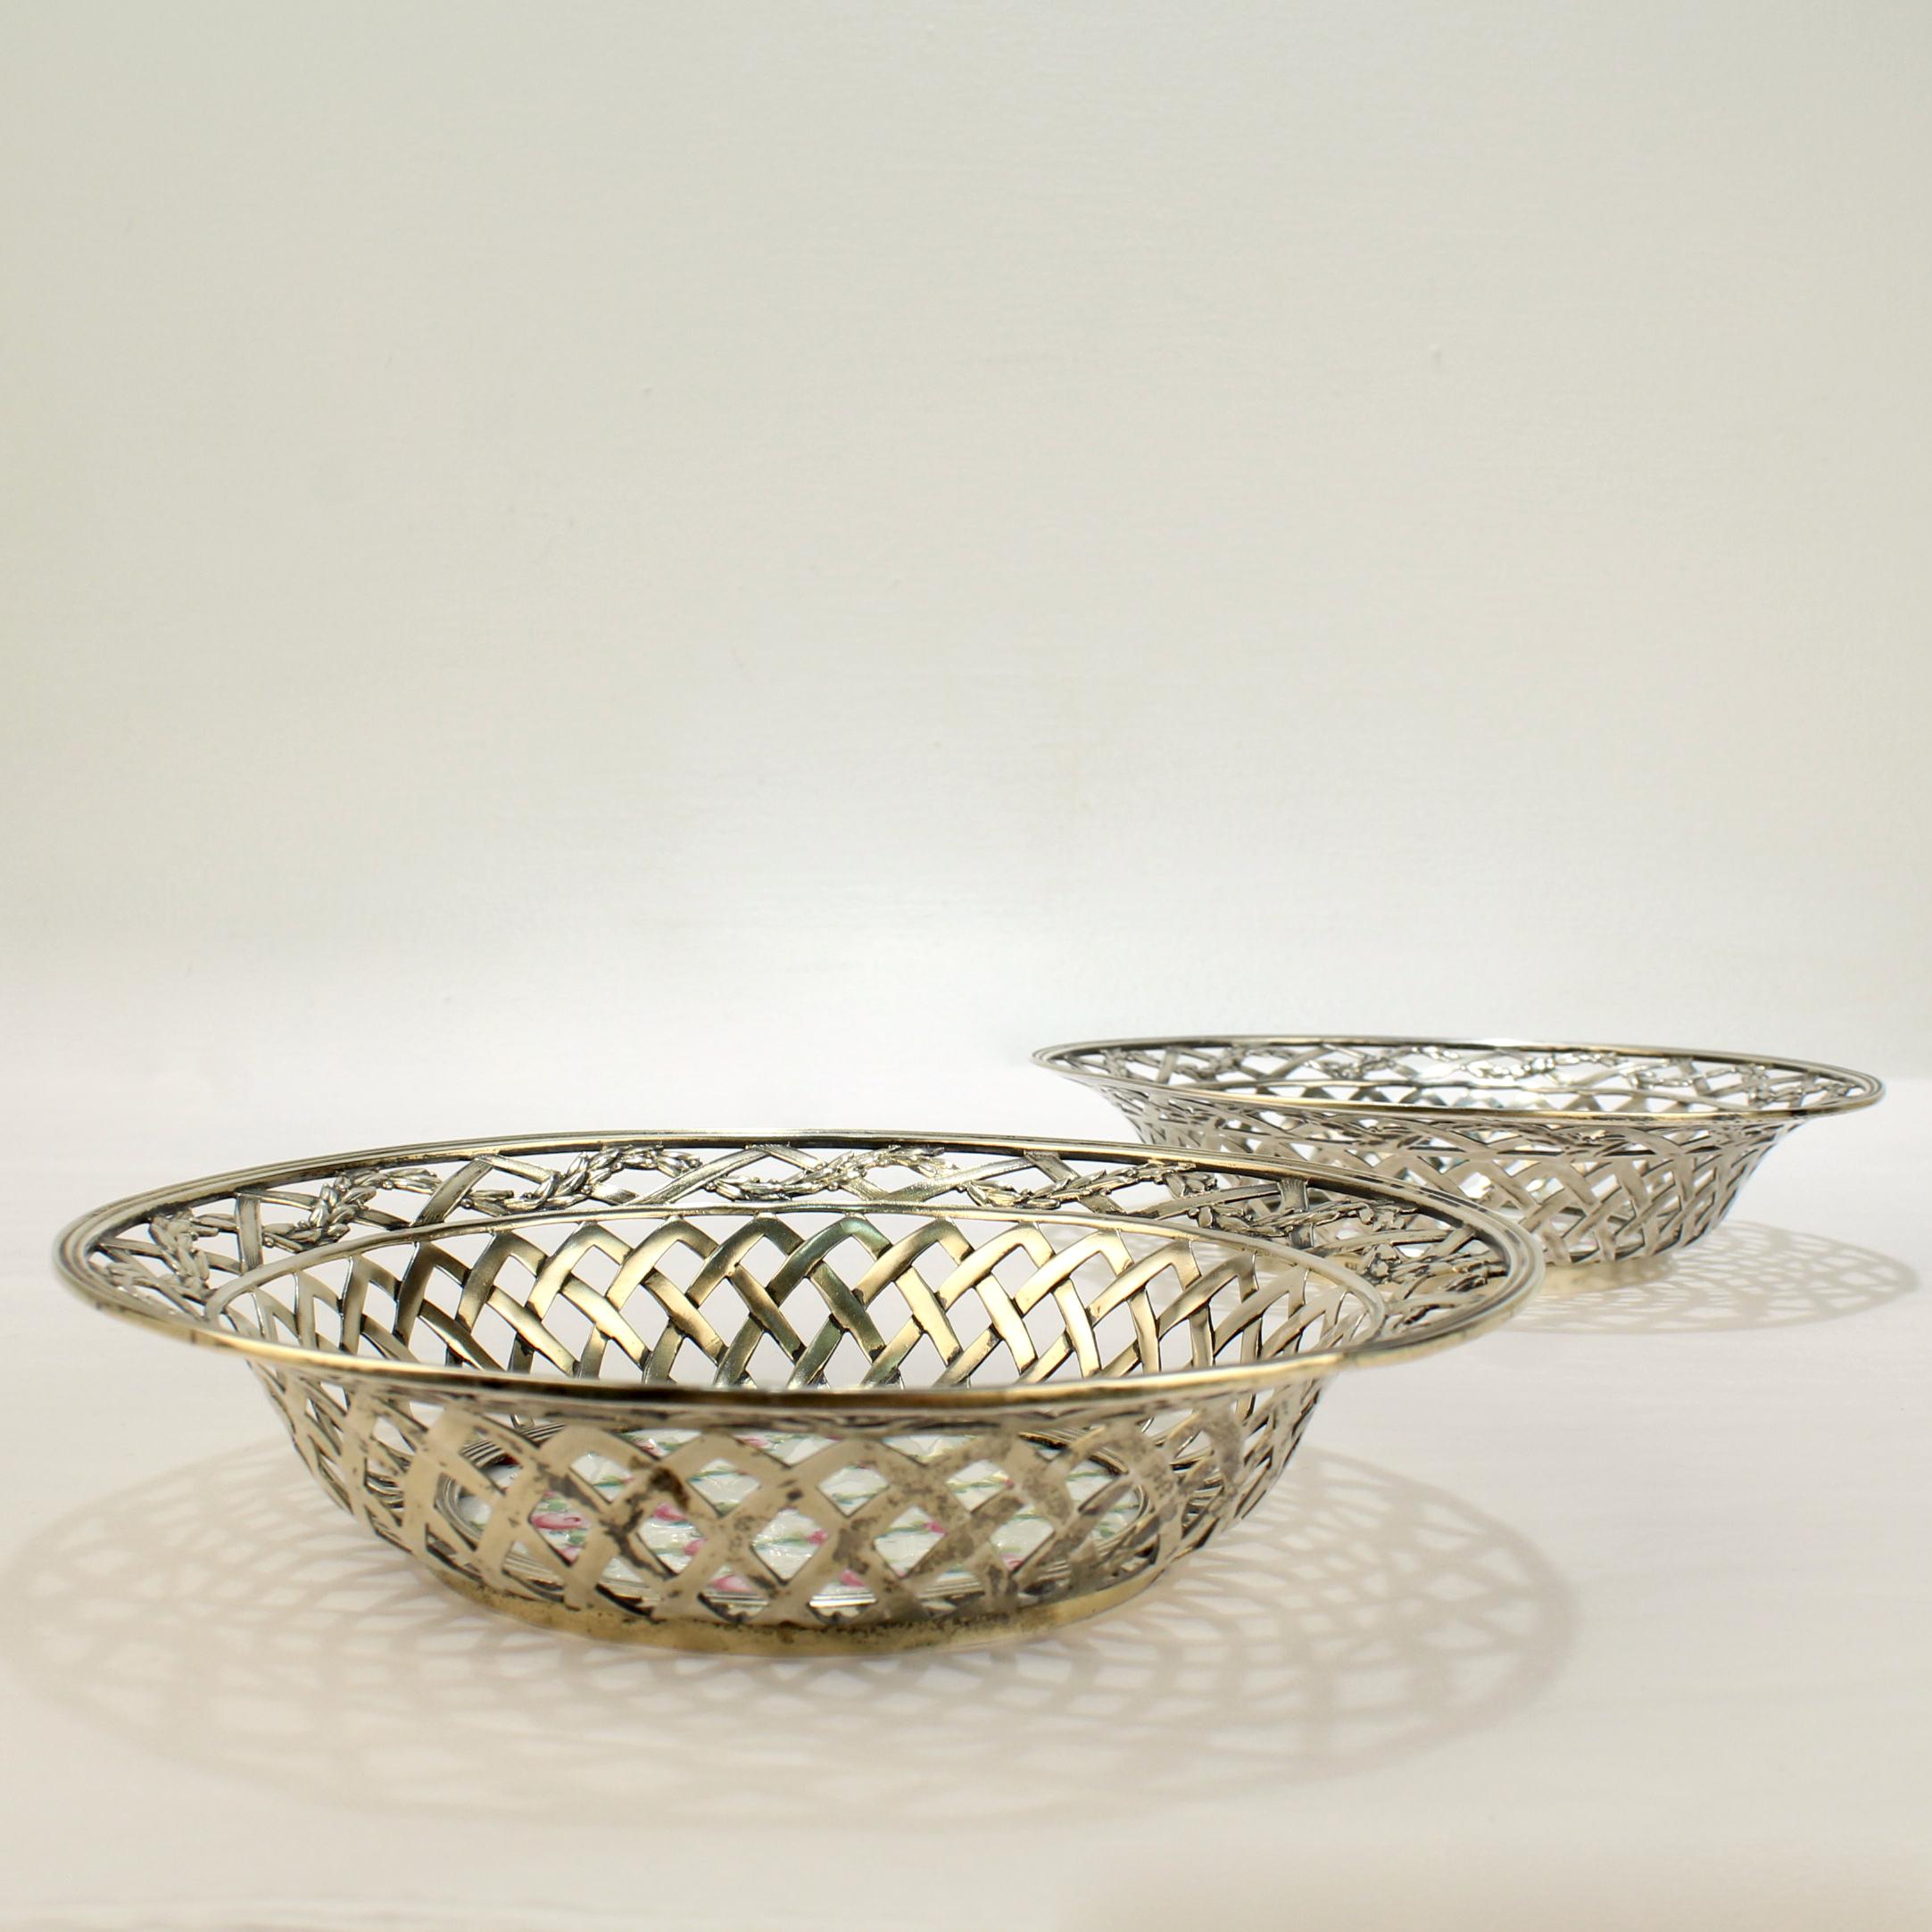 Pair of Antique Reticulated Sterling Silver Bowls with Sevres Porcelain Plaques For Sale 3